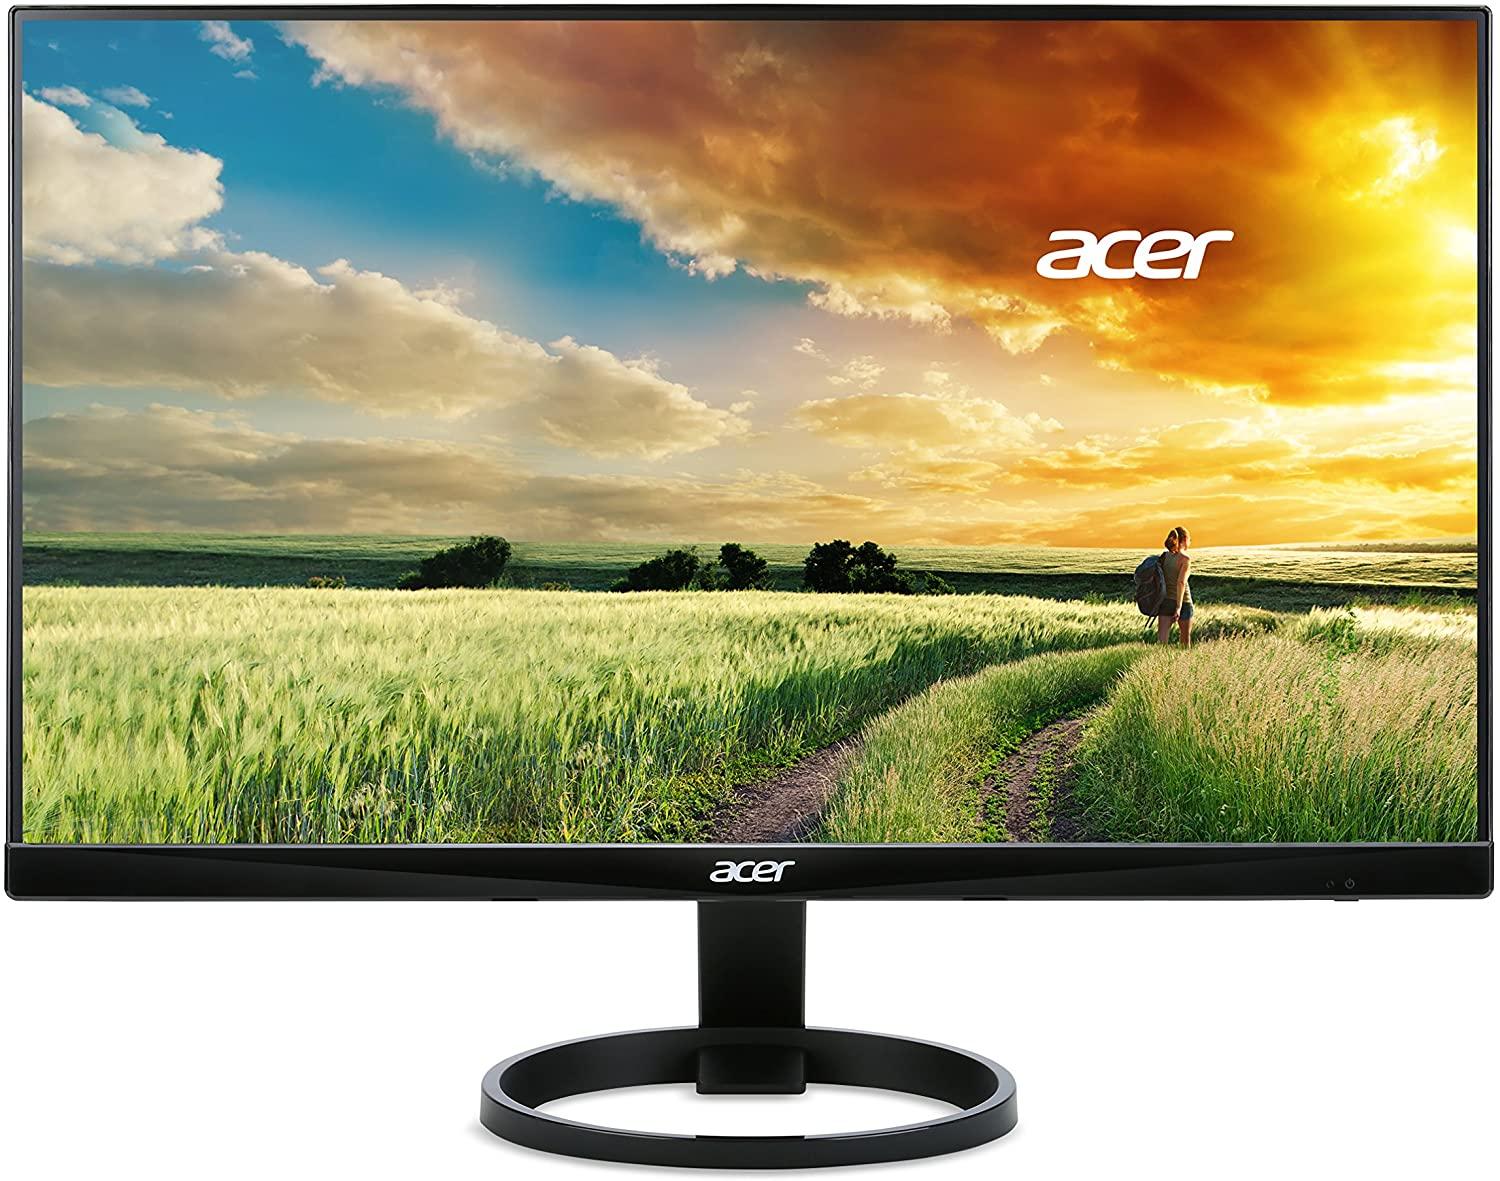 Acer R240HY bidx 23in Widescreen Monitor for $109.99 Shipped